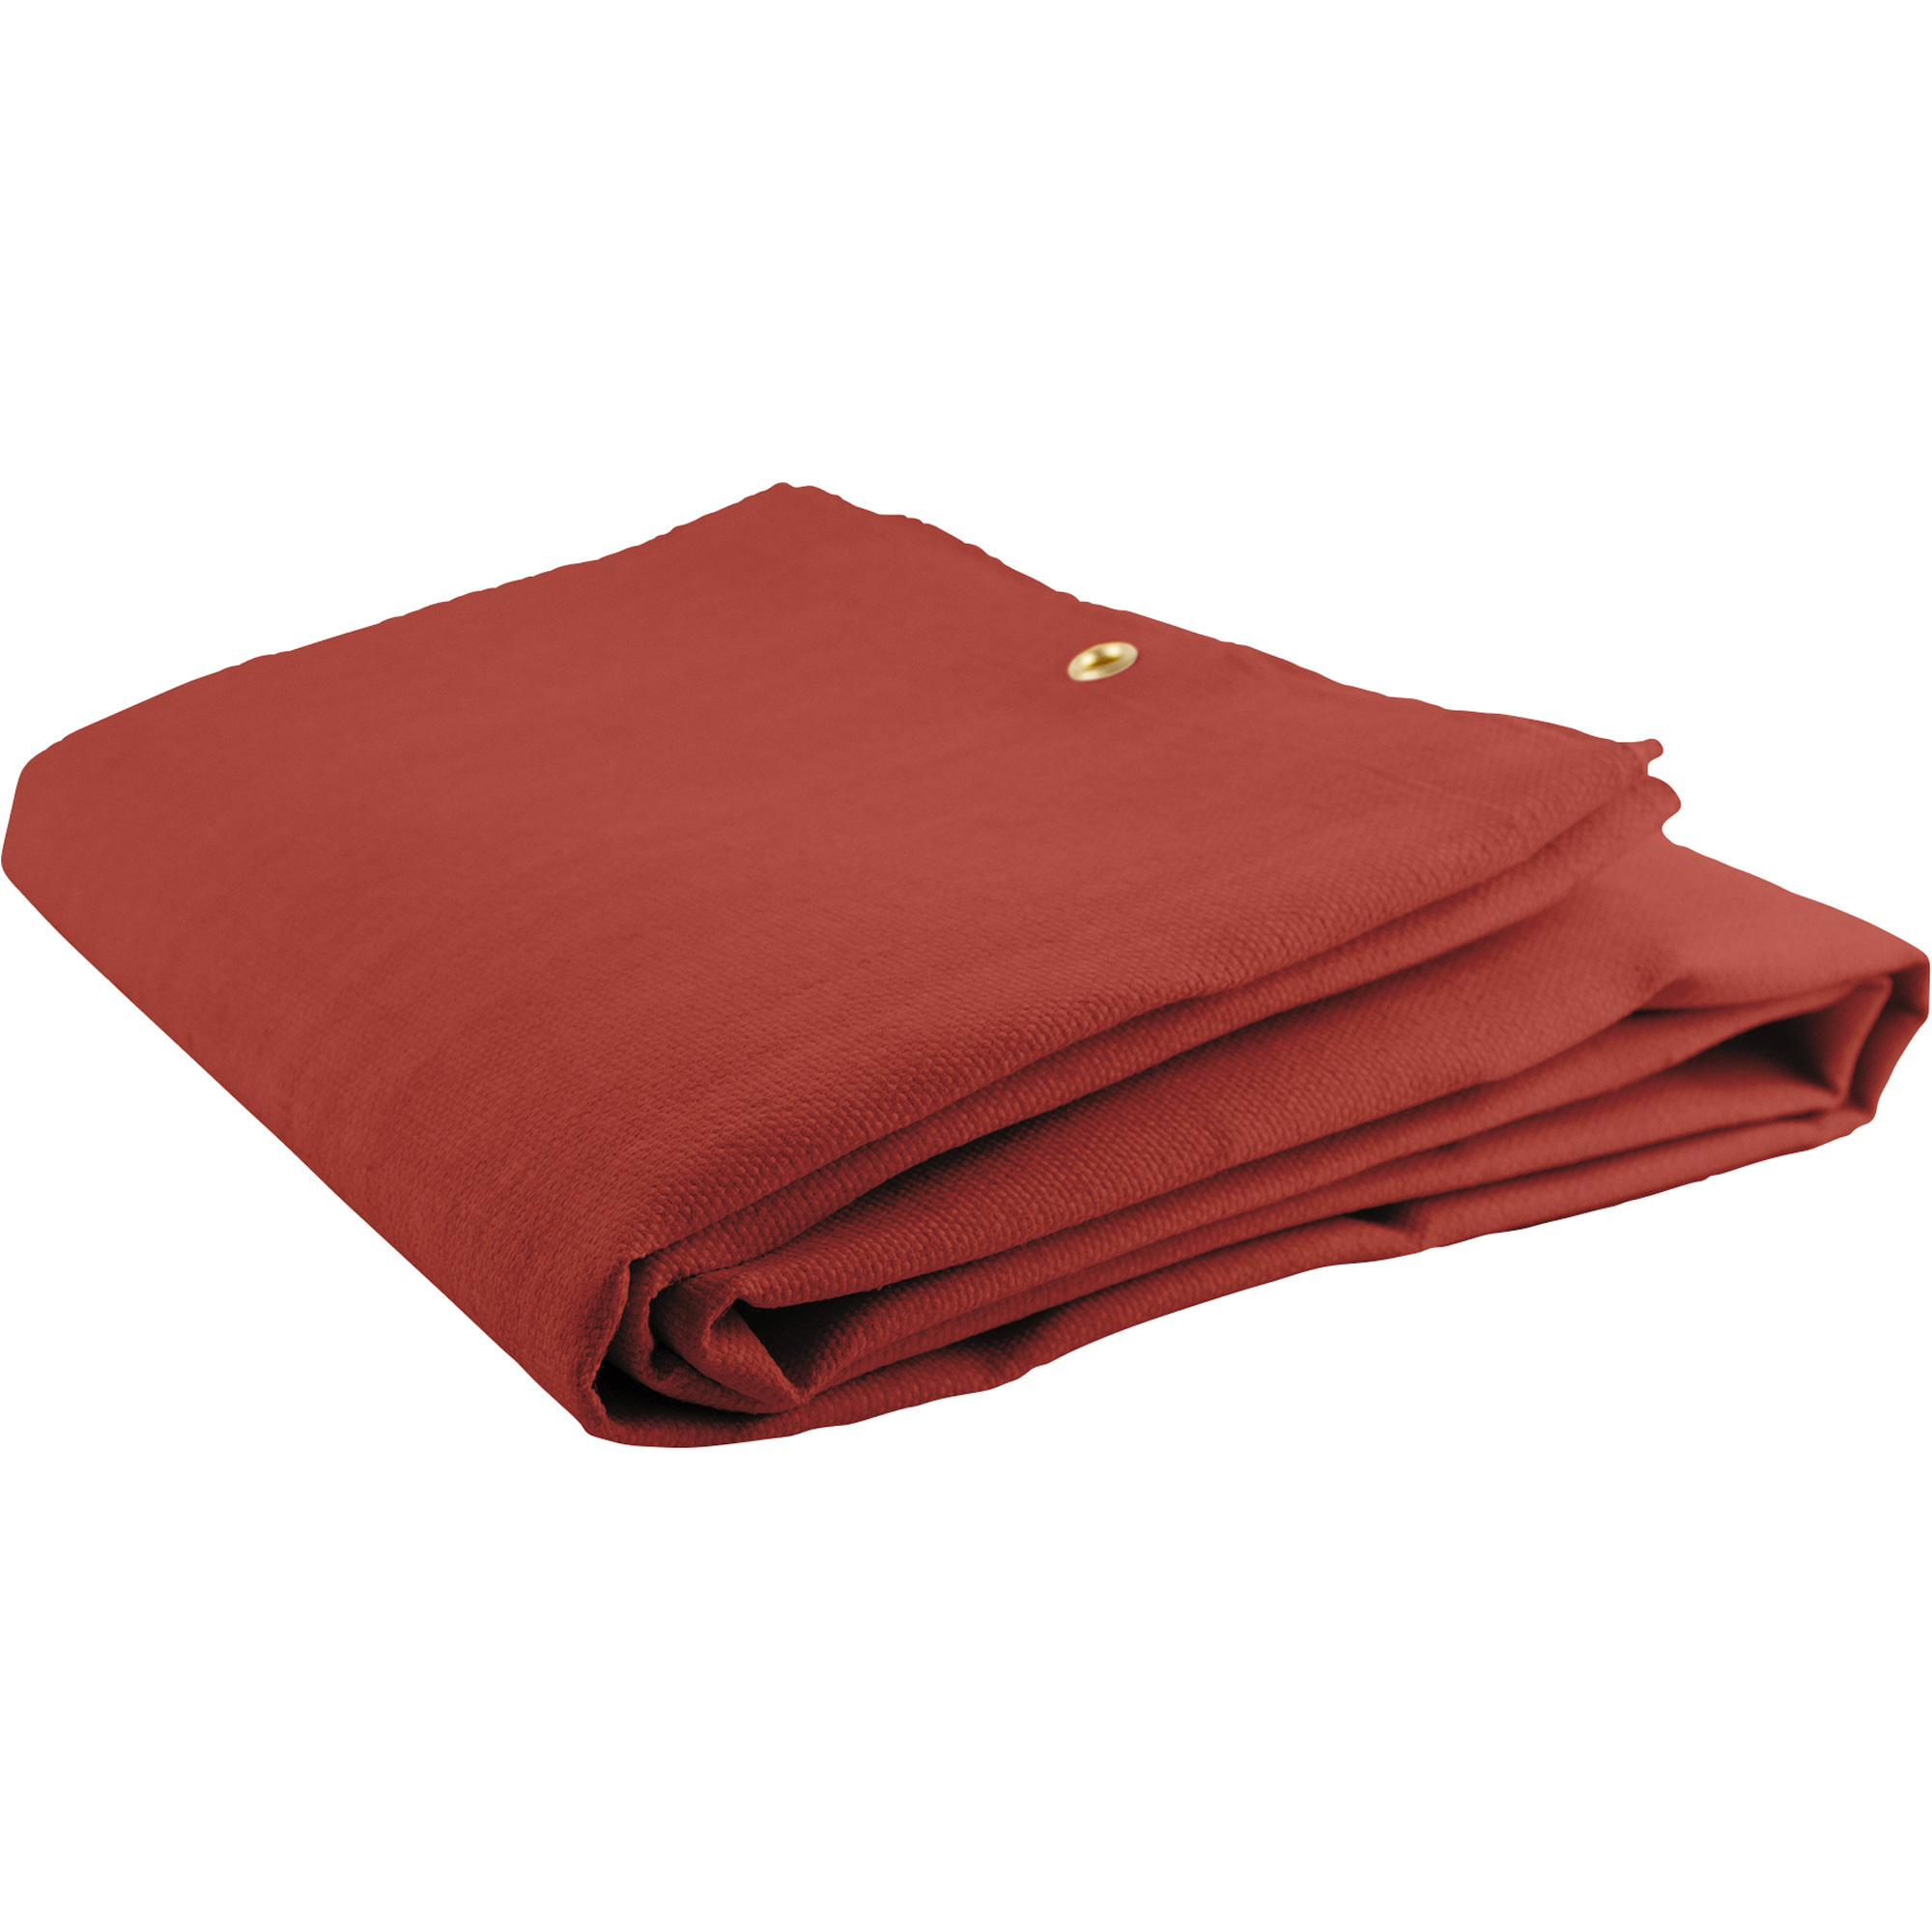 Jackson Safety Silicone-Coated Fiberglass Welding Blanket, Red, 6ft. x 6ft., Model 36156